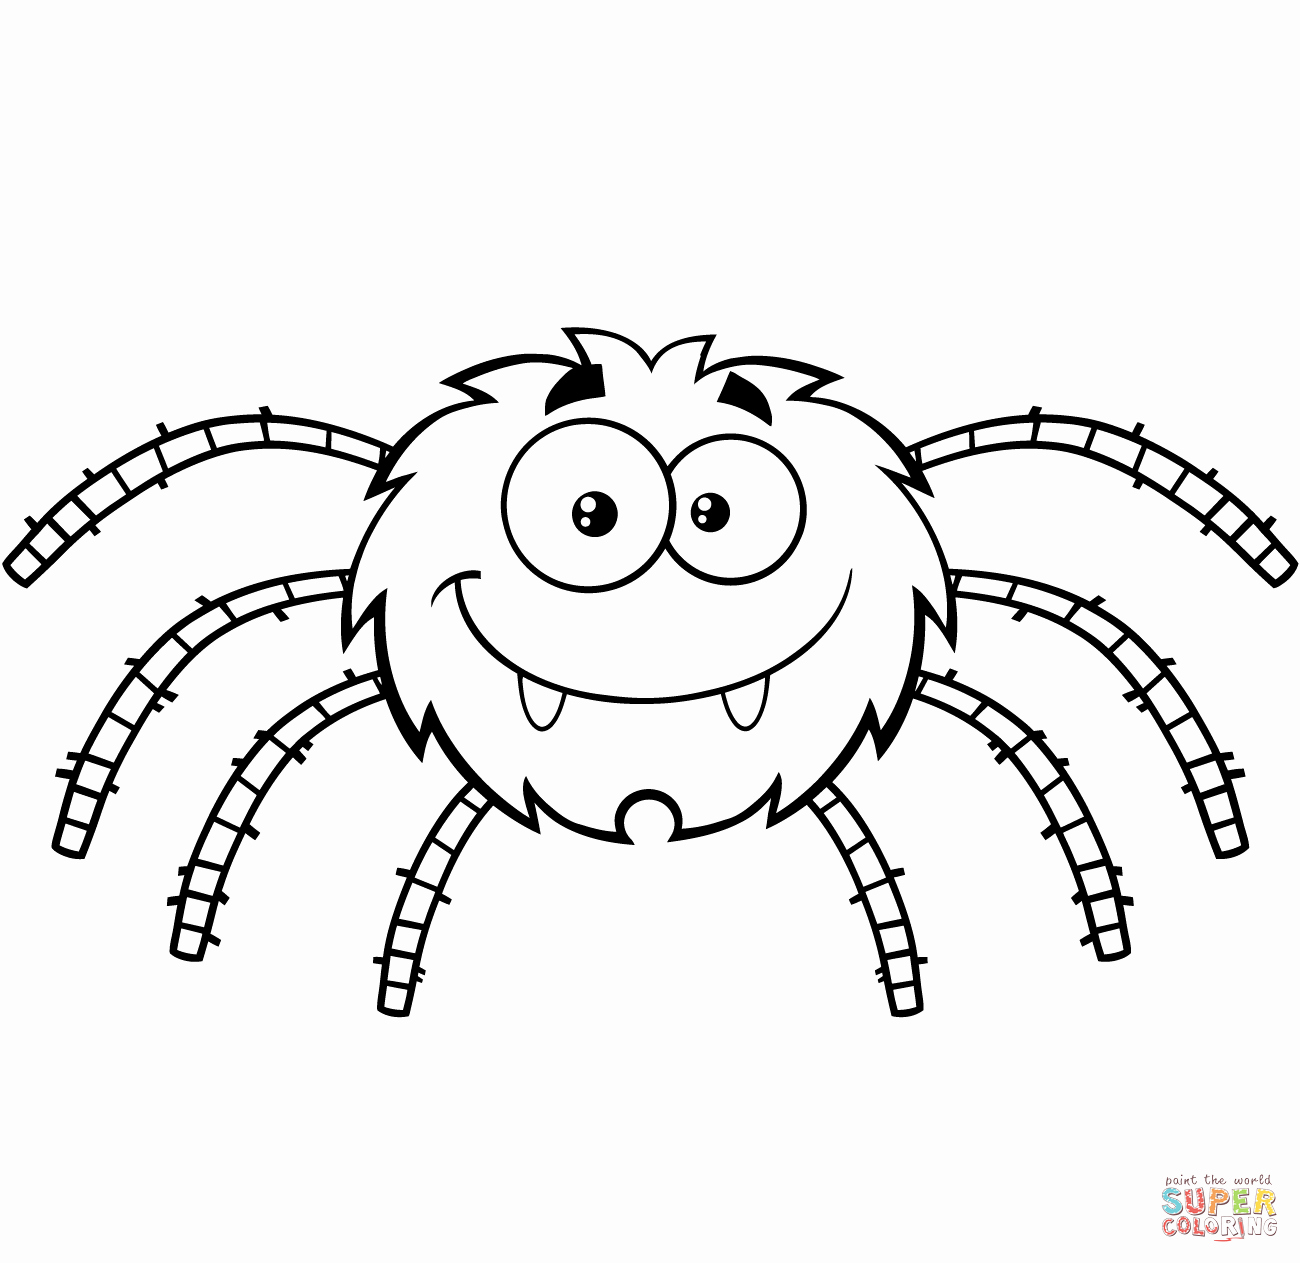 Halloween Spider Coloring Pages at GetDrawings Free download